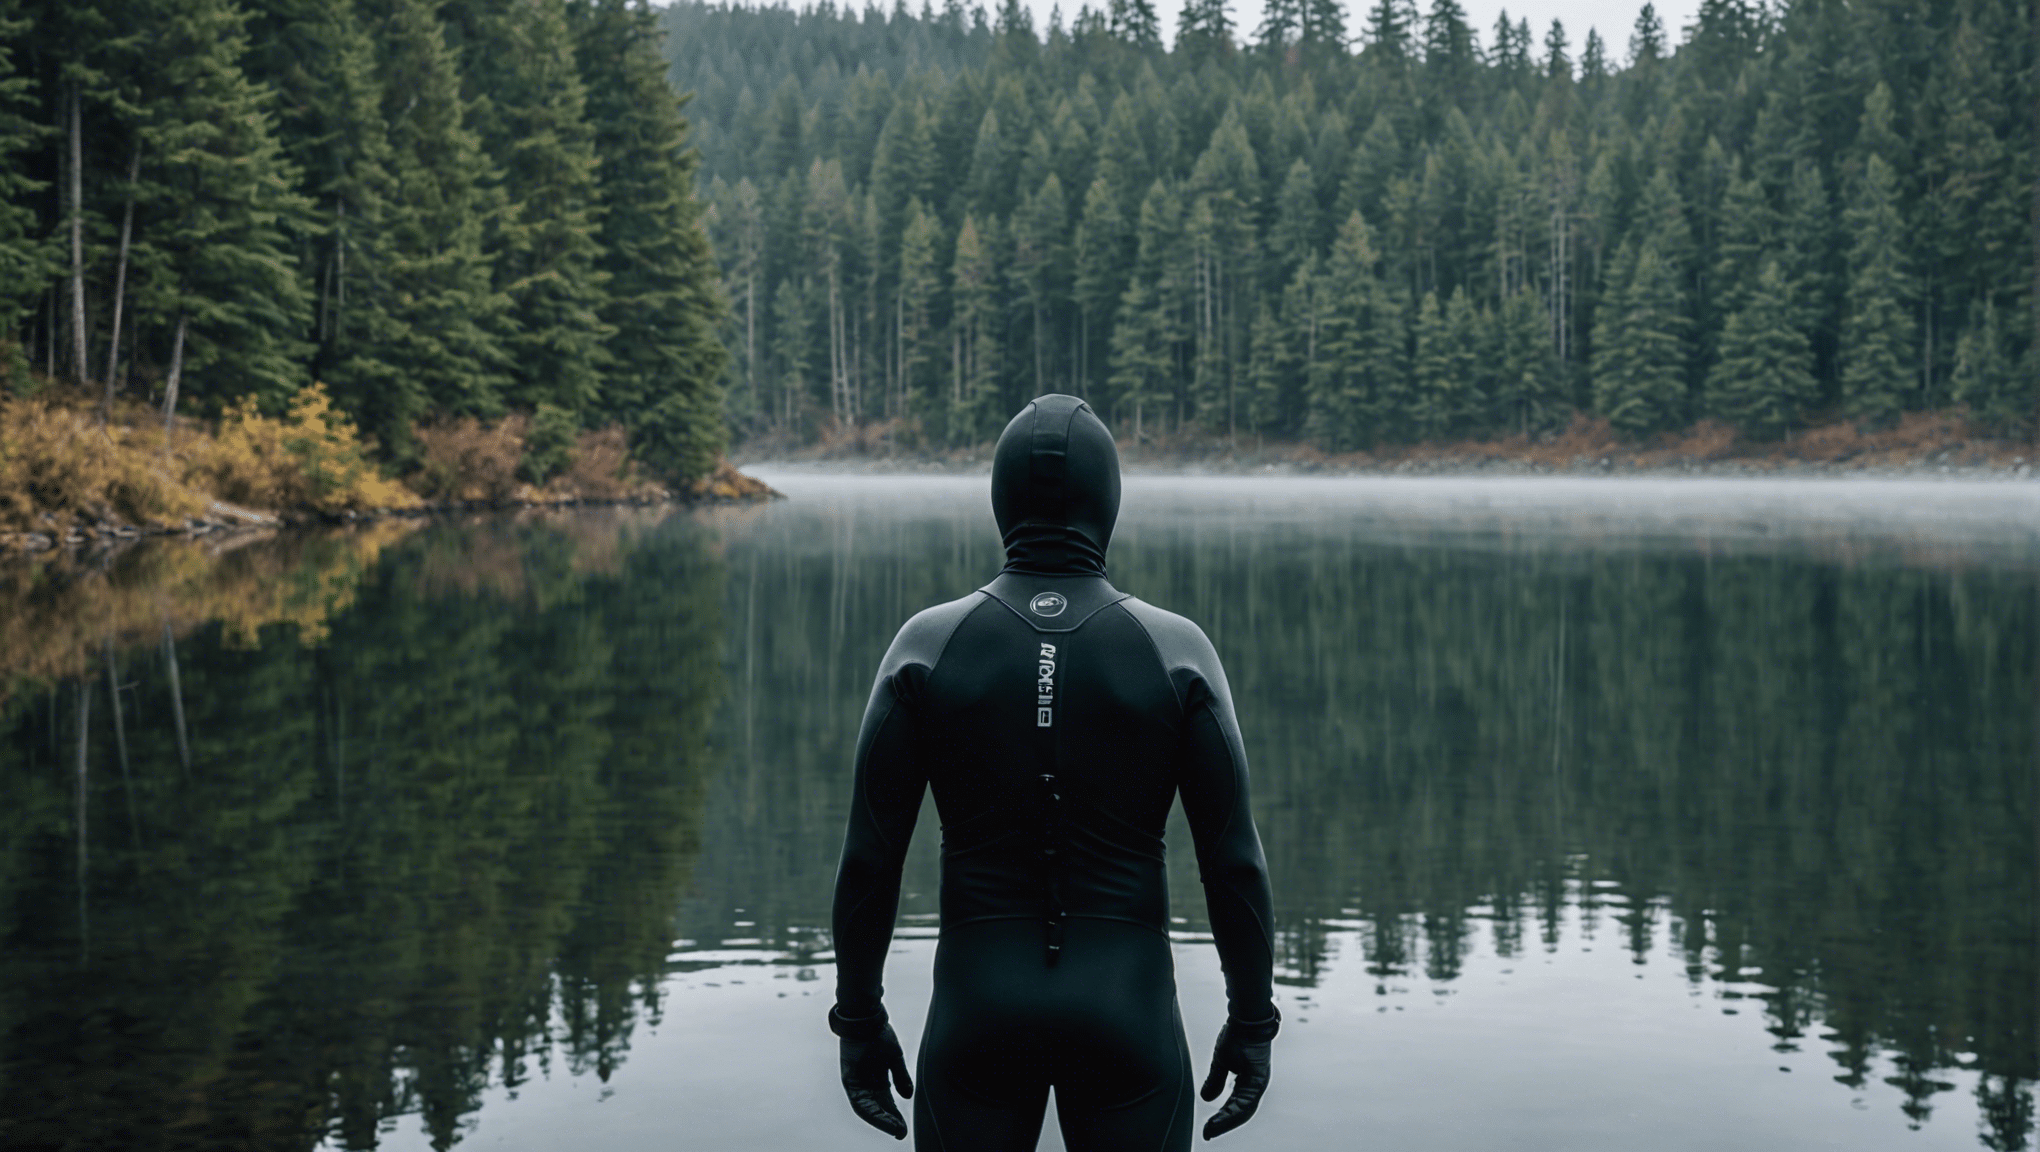 Determined swimmer prepares for brisk lake plunge at dawn